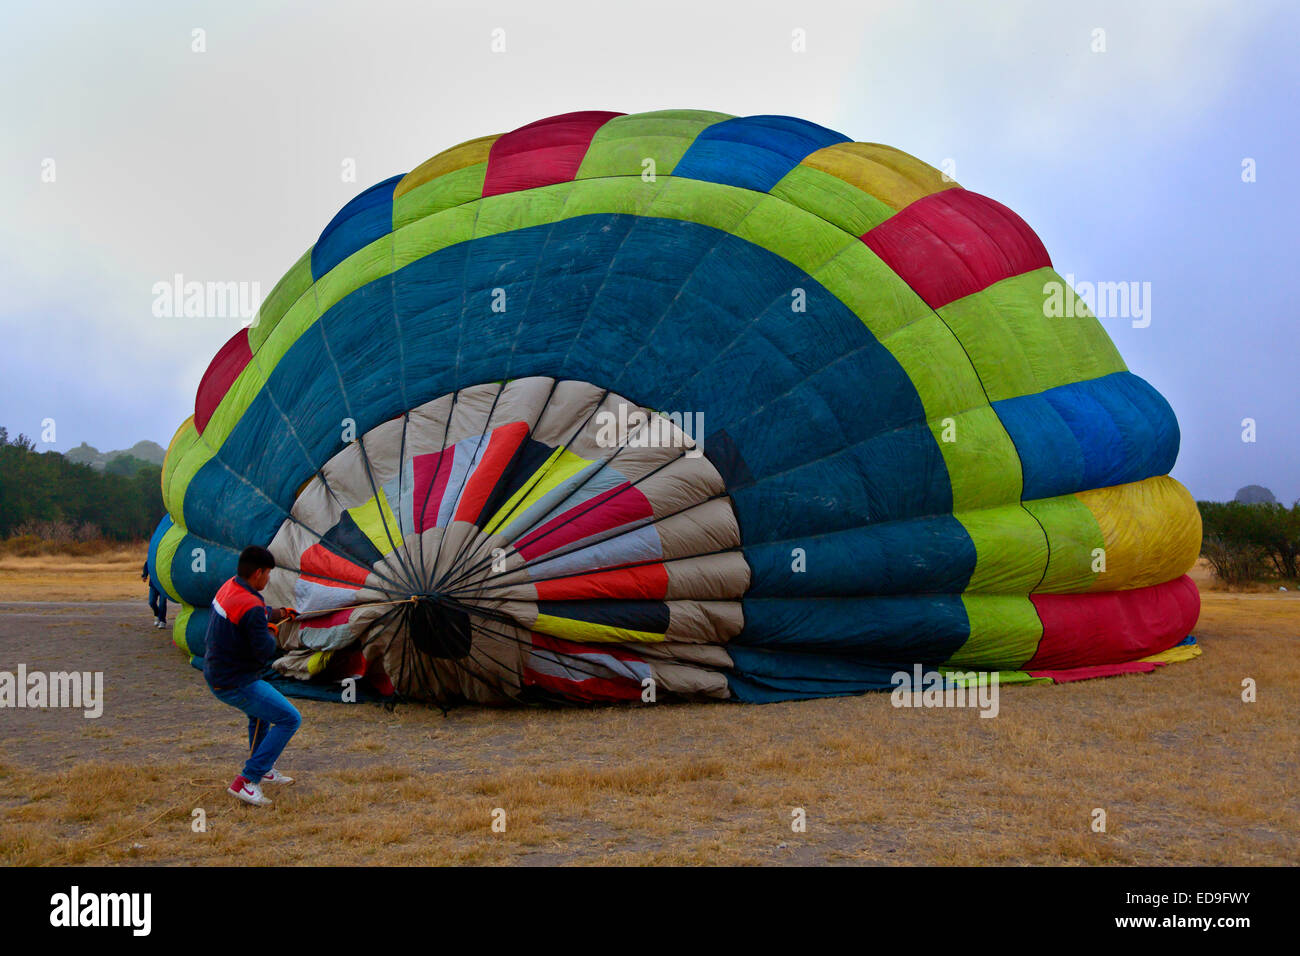 BALLOON RIDES are offered by Coyote Adventures in SAN MIGUEL DE ALLENDE, MEXICO Stock Photo